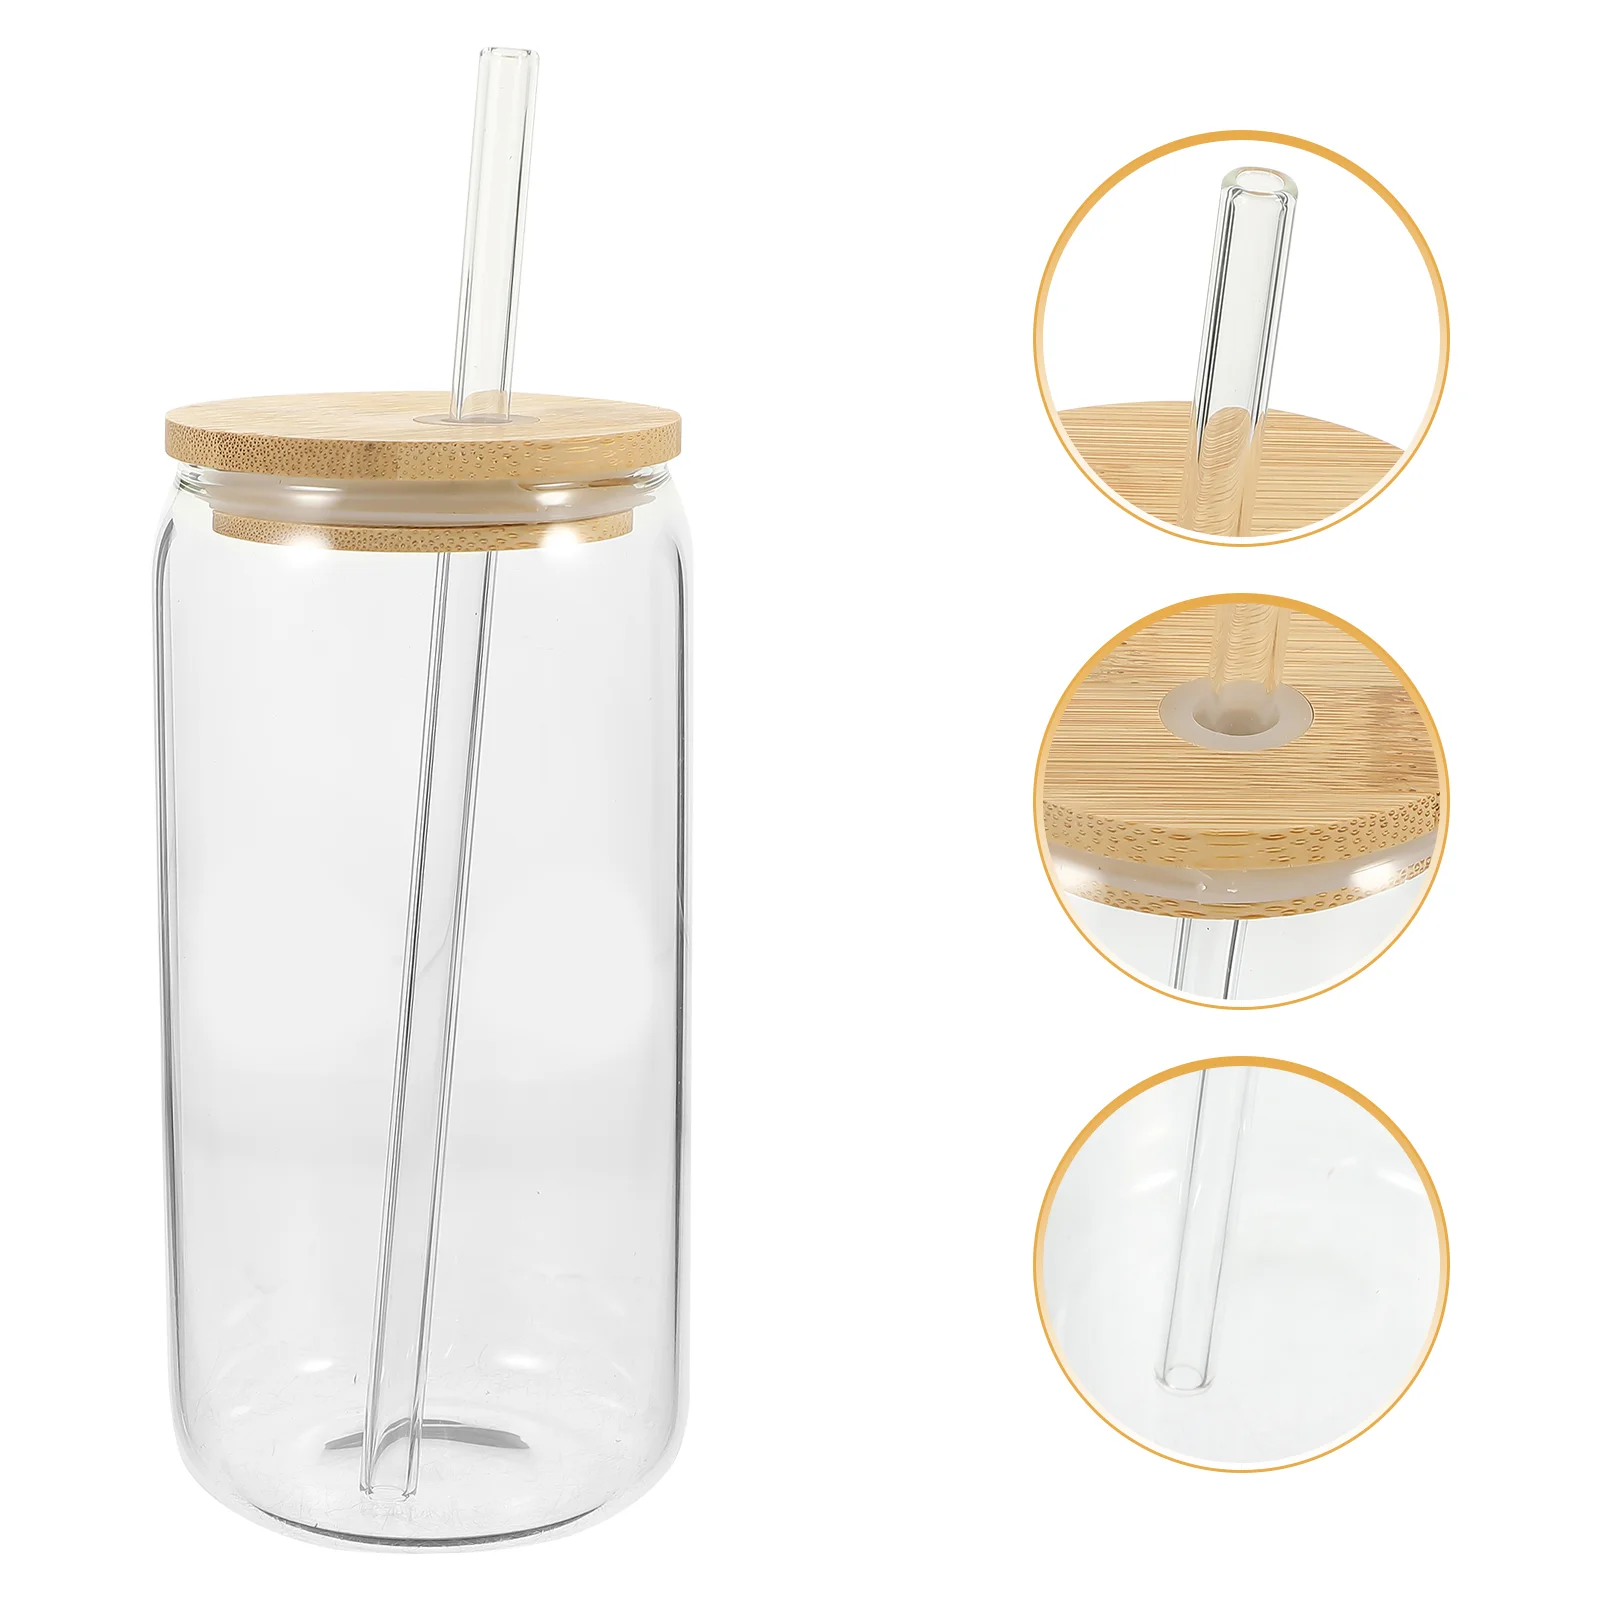 

Bamboo Lid Drink Cup Drinking Glass Coffee Straw Mug Cups Lids Clear Tumblers Bulk Iced Class Straws Travel Water Bottle